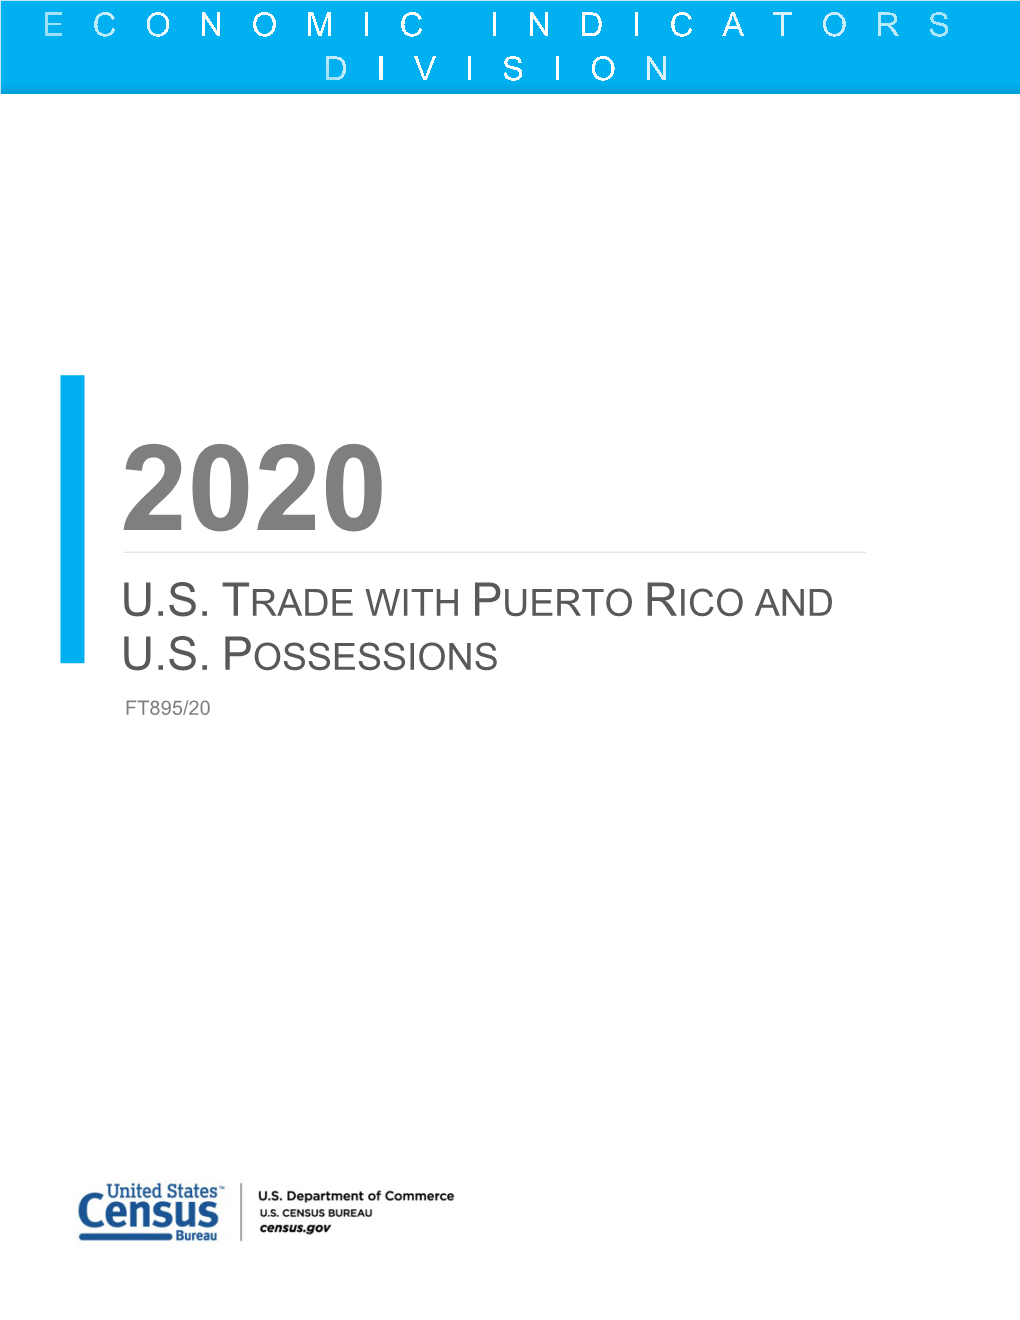 Download U.S. Trade with Puerto Rico and U.S. Possessions, 2020